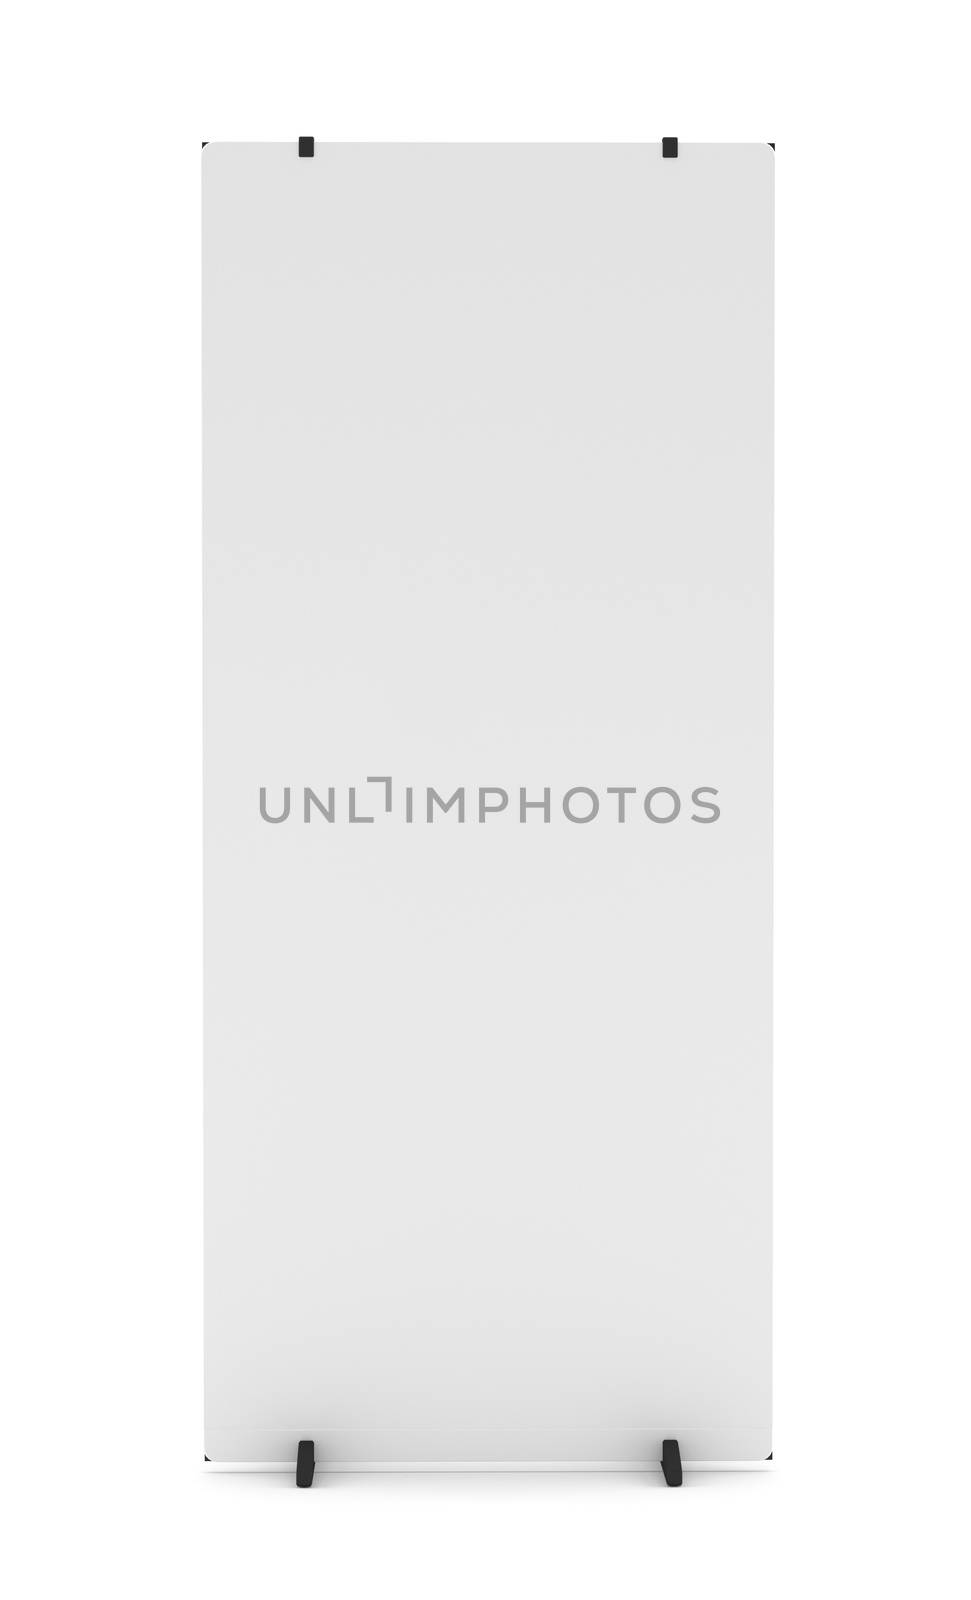 Trade show booth white and blank. Isolated on white background. Template mockup for your design. 3D illustration